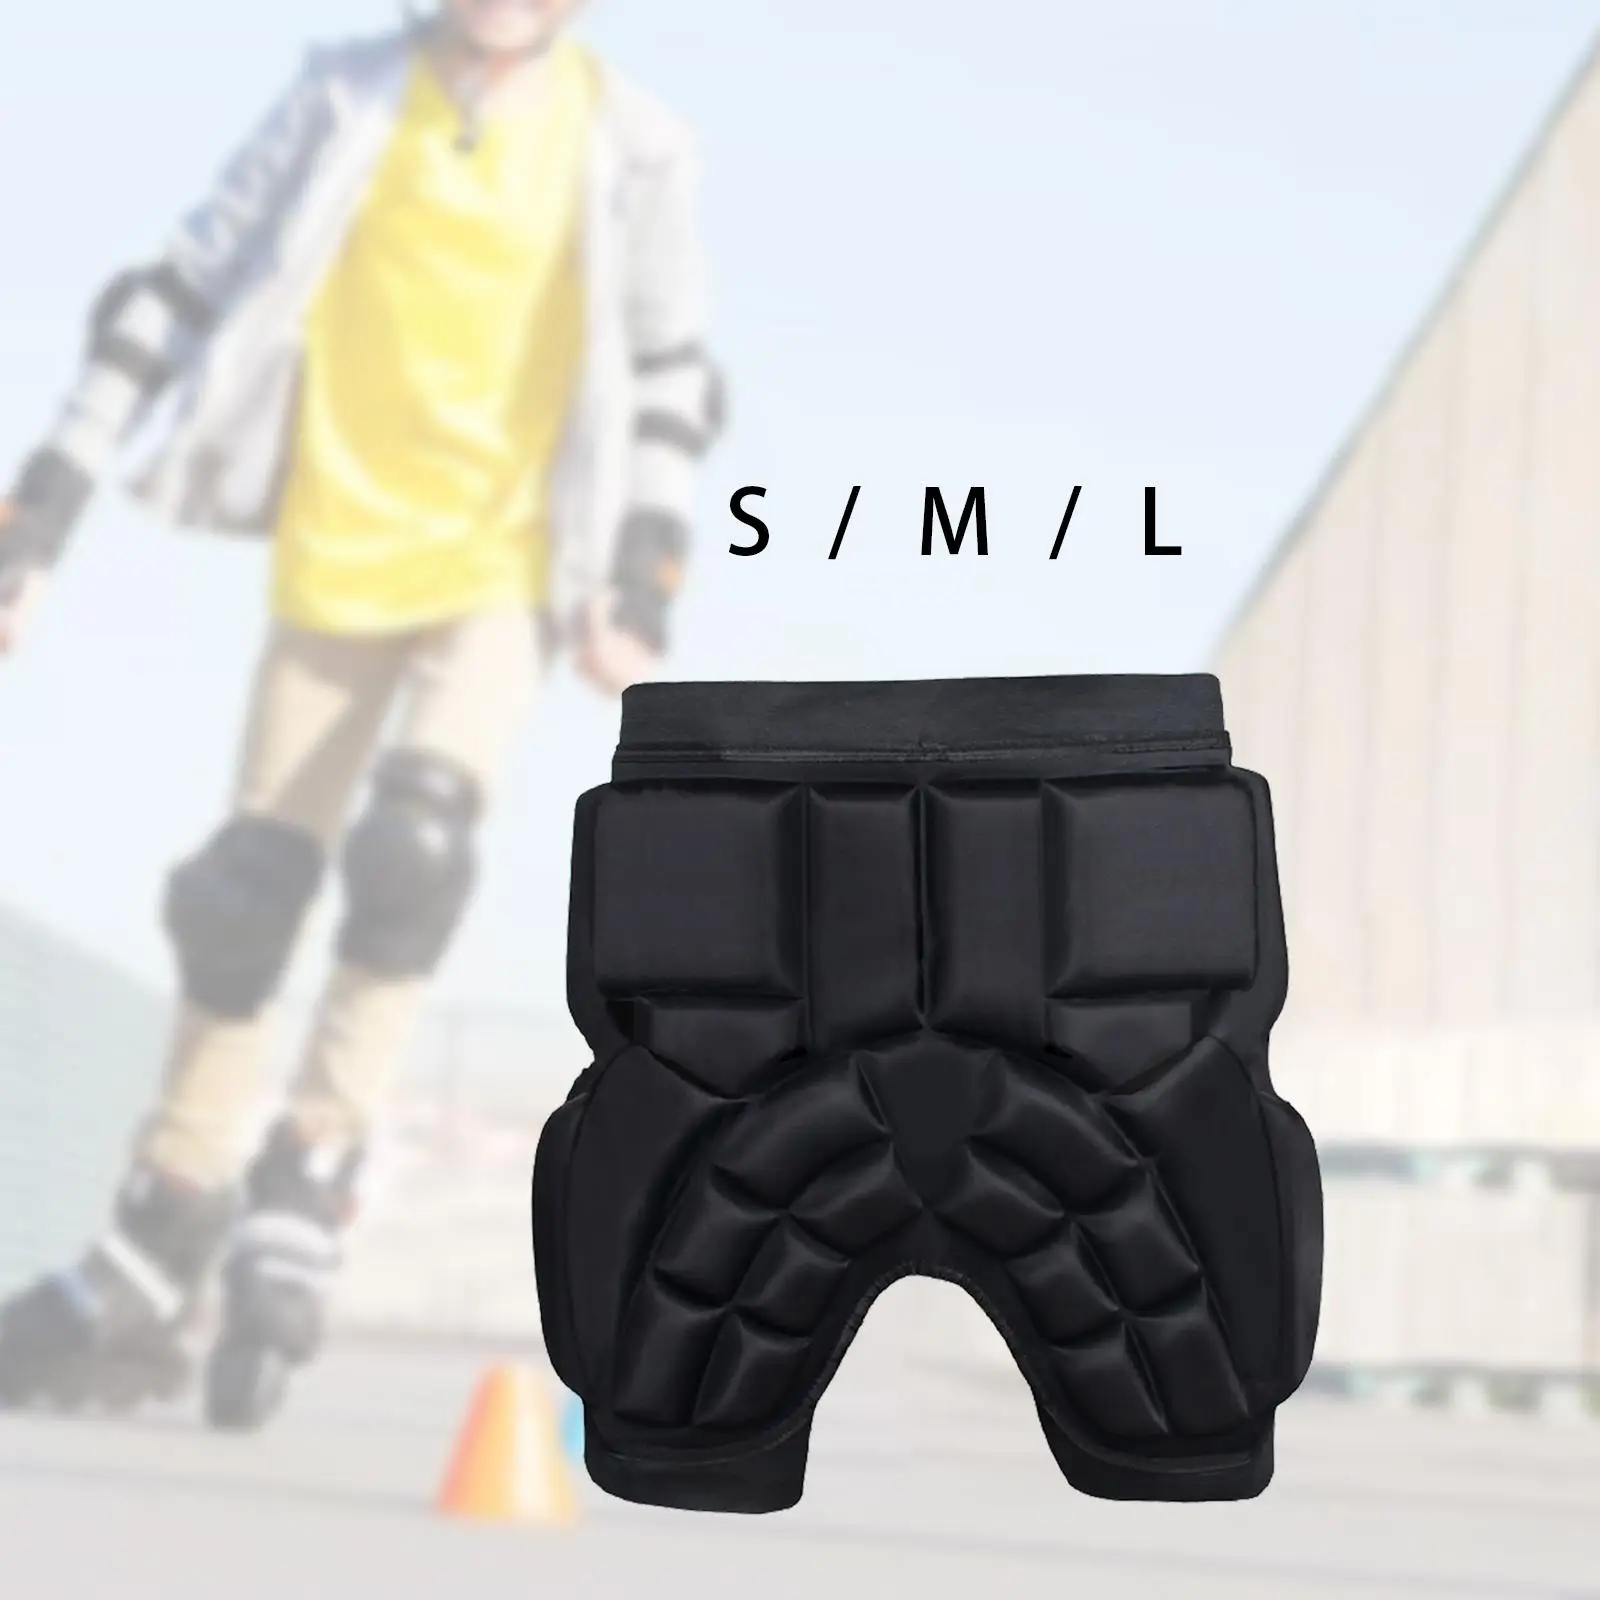 Hip Guard Pad Shockproof Supporter Guard Pad Impact Protection Support Gear for Skiing Biking Snowboarding BMX Sports